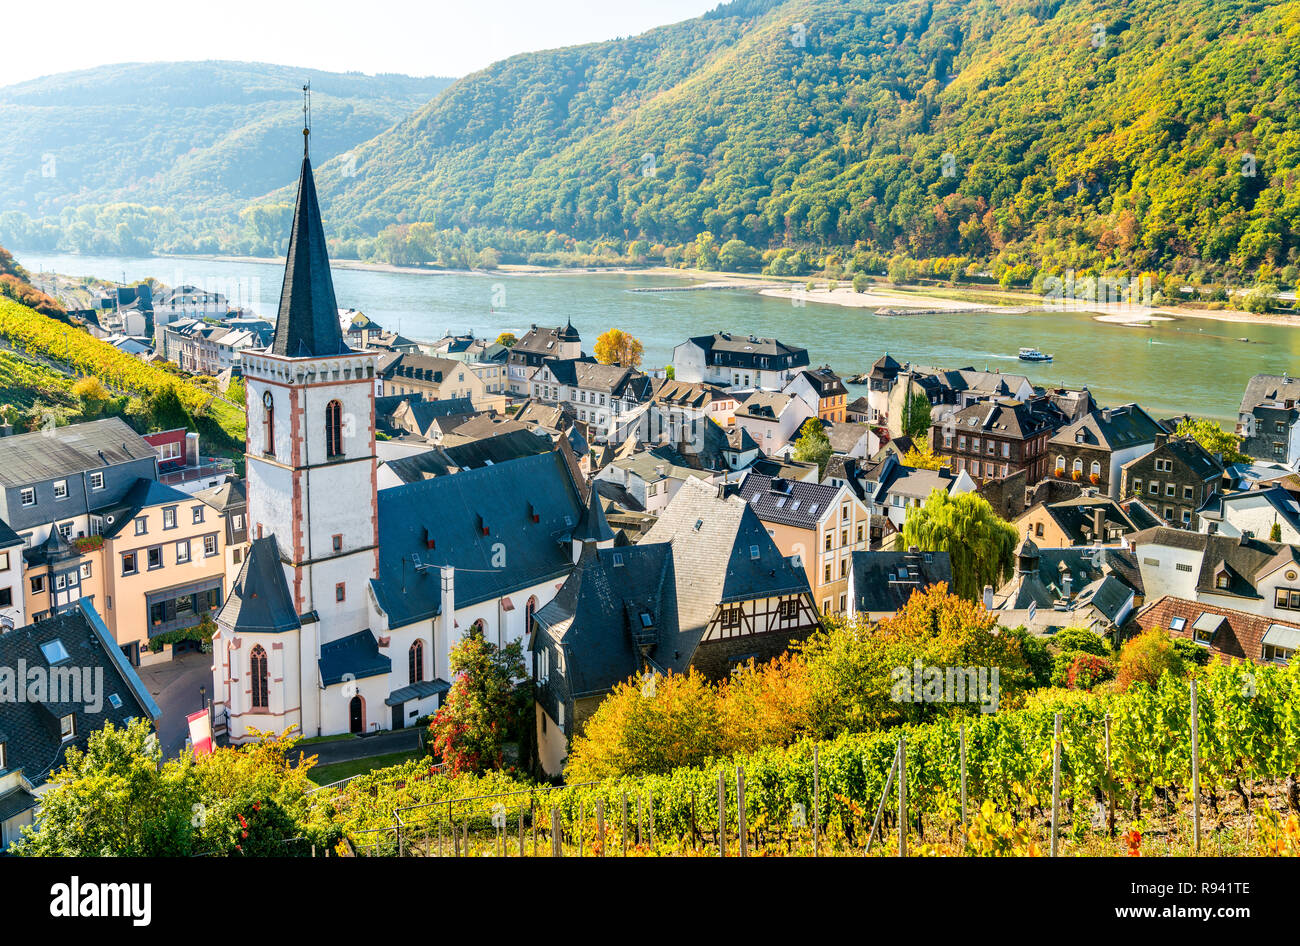 Hony Cross Church in Assmannshausen, the Upper Middle Rhine Valley in Germany Stock Photo